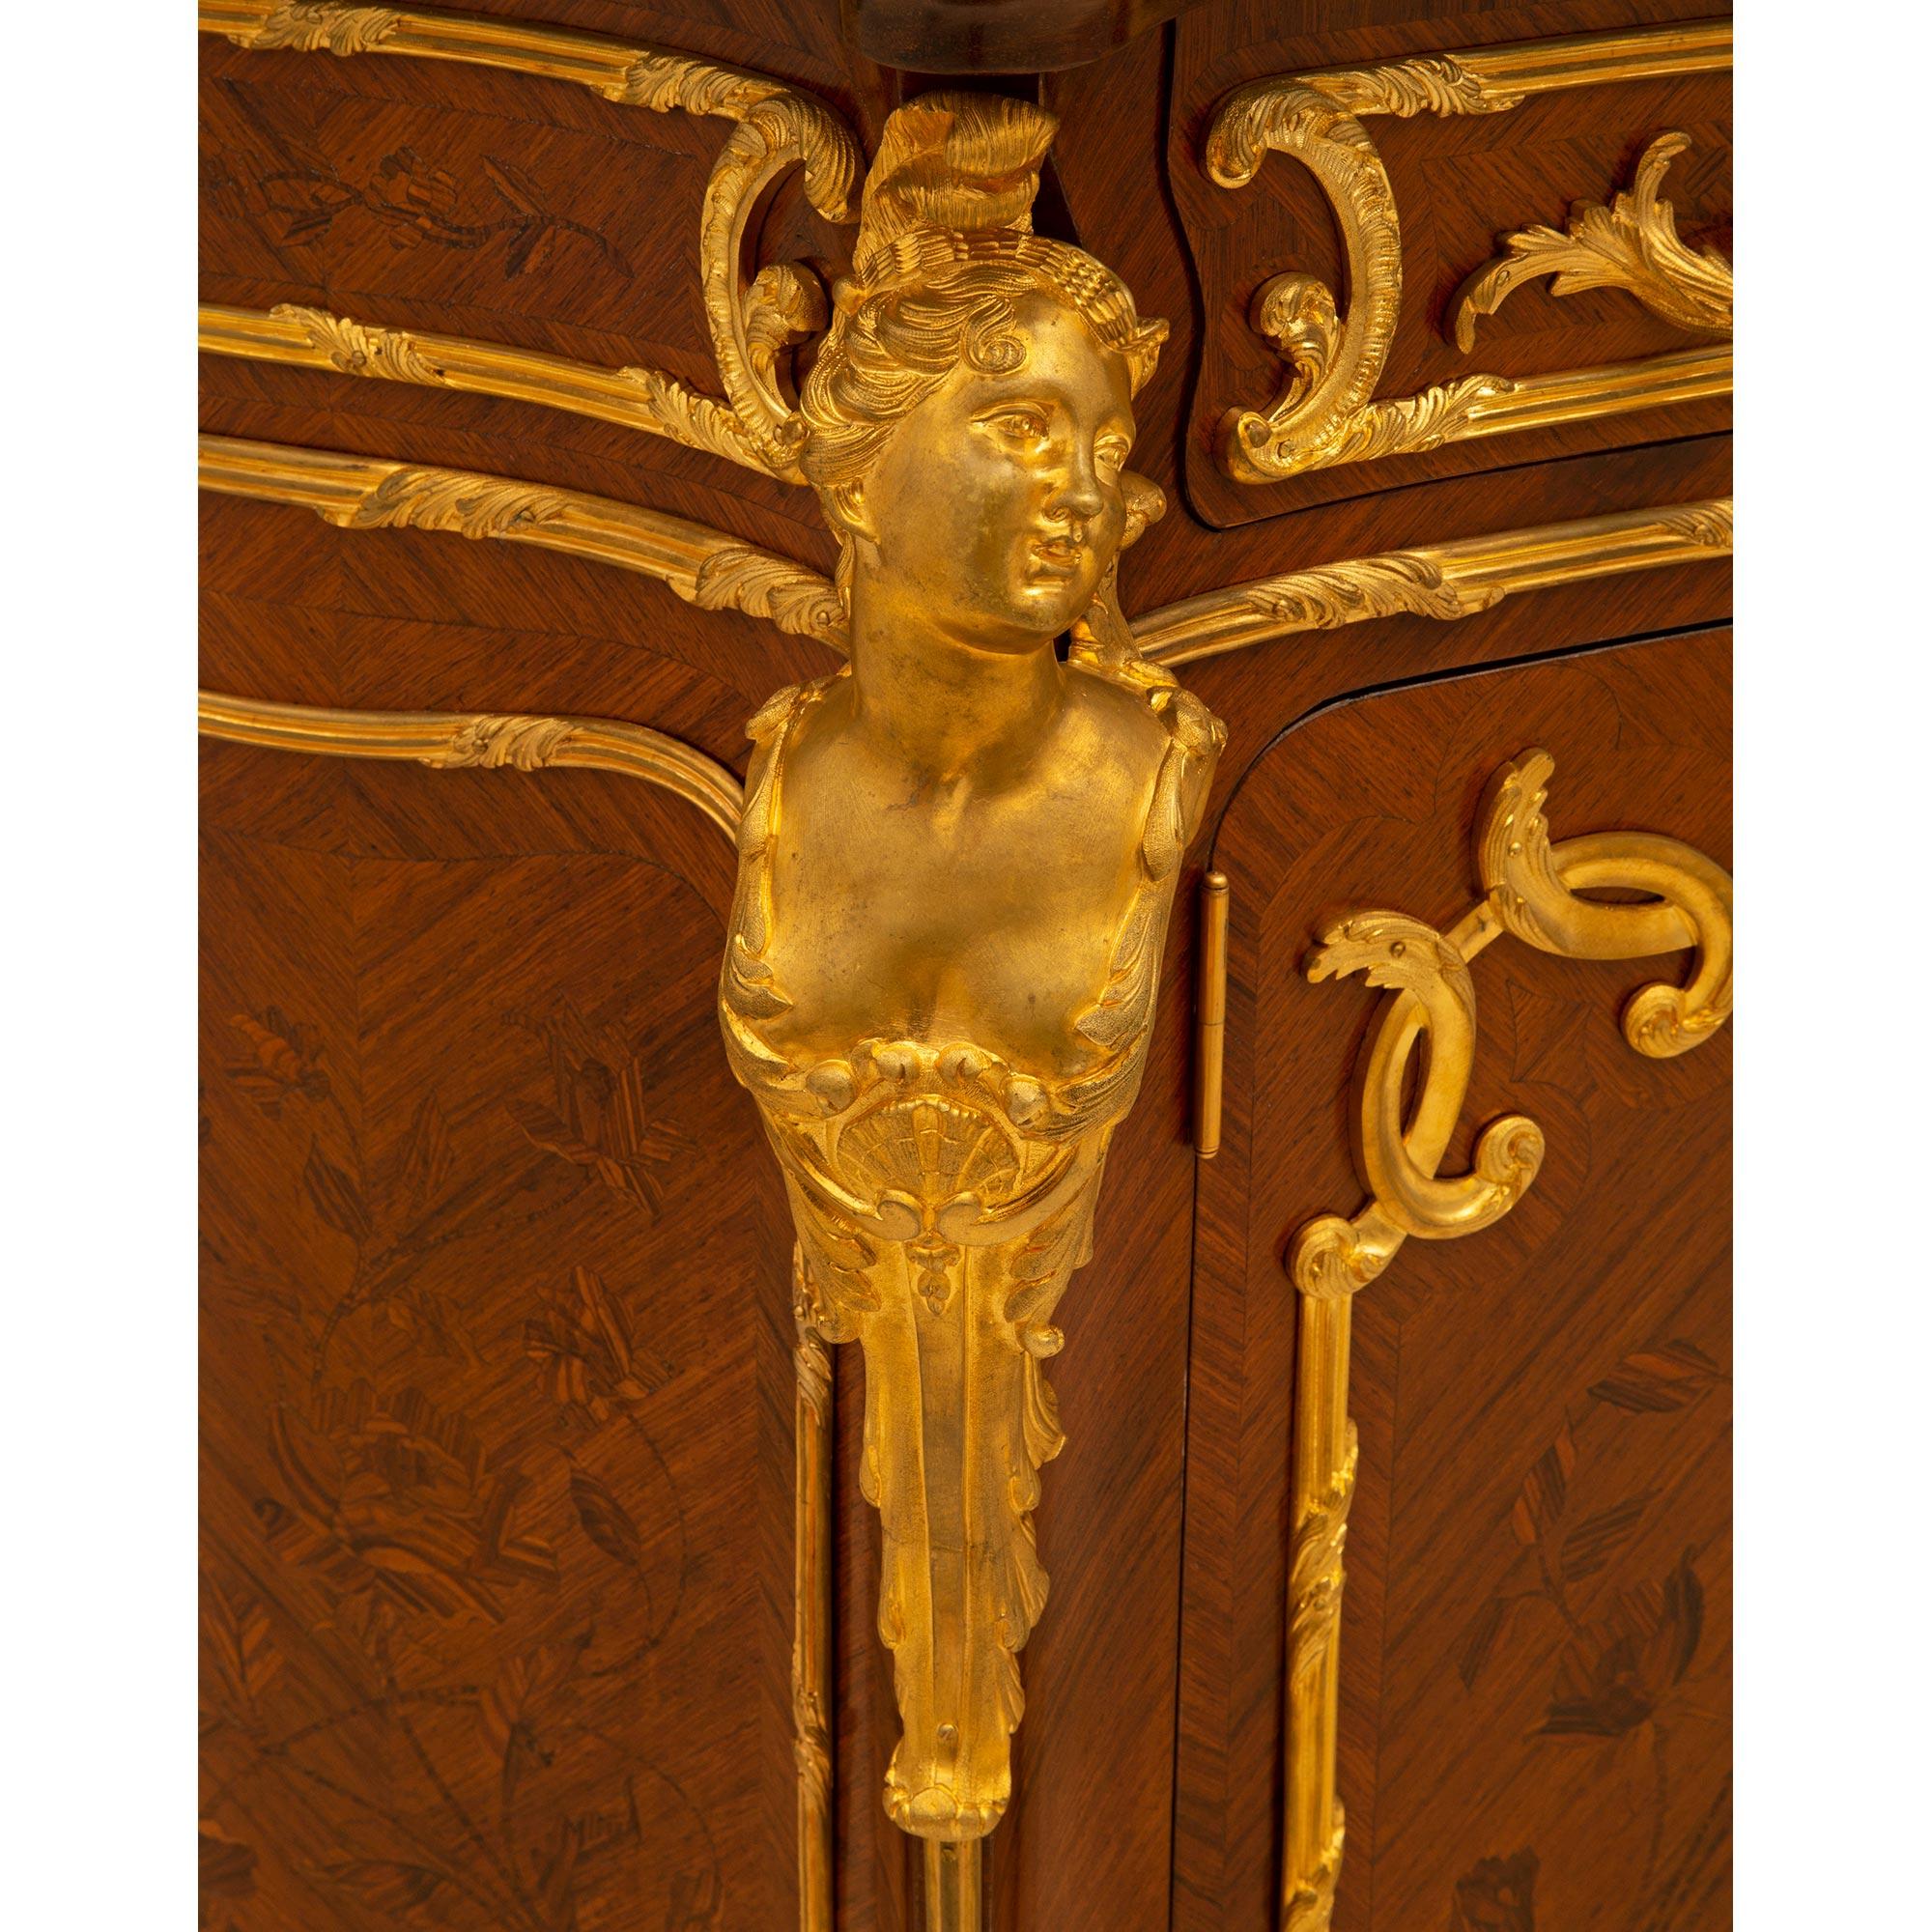 French 19th Century Louis XV Style Tulipwood Kingwood and Ormolu Cabinet For Sale 2